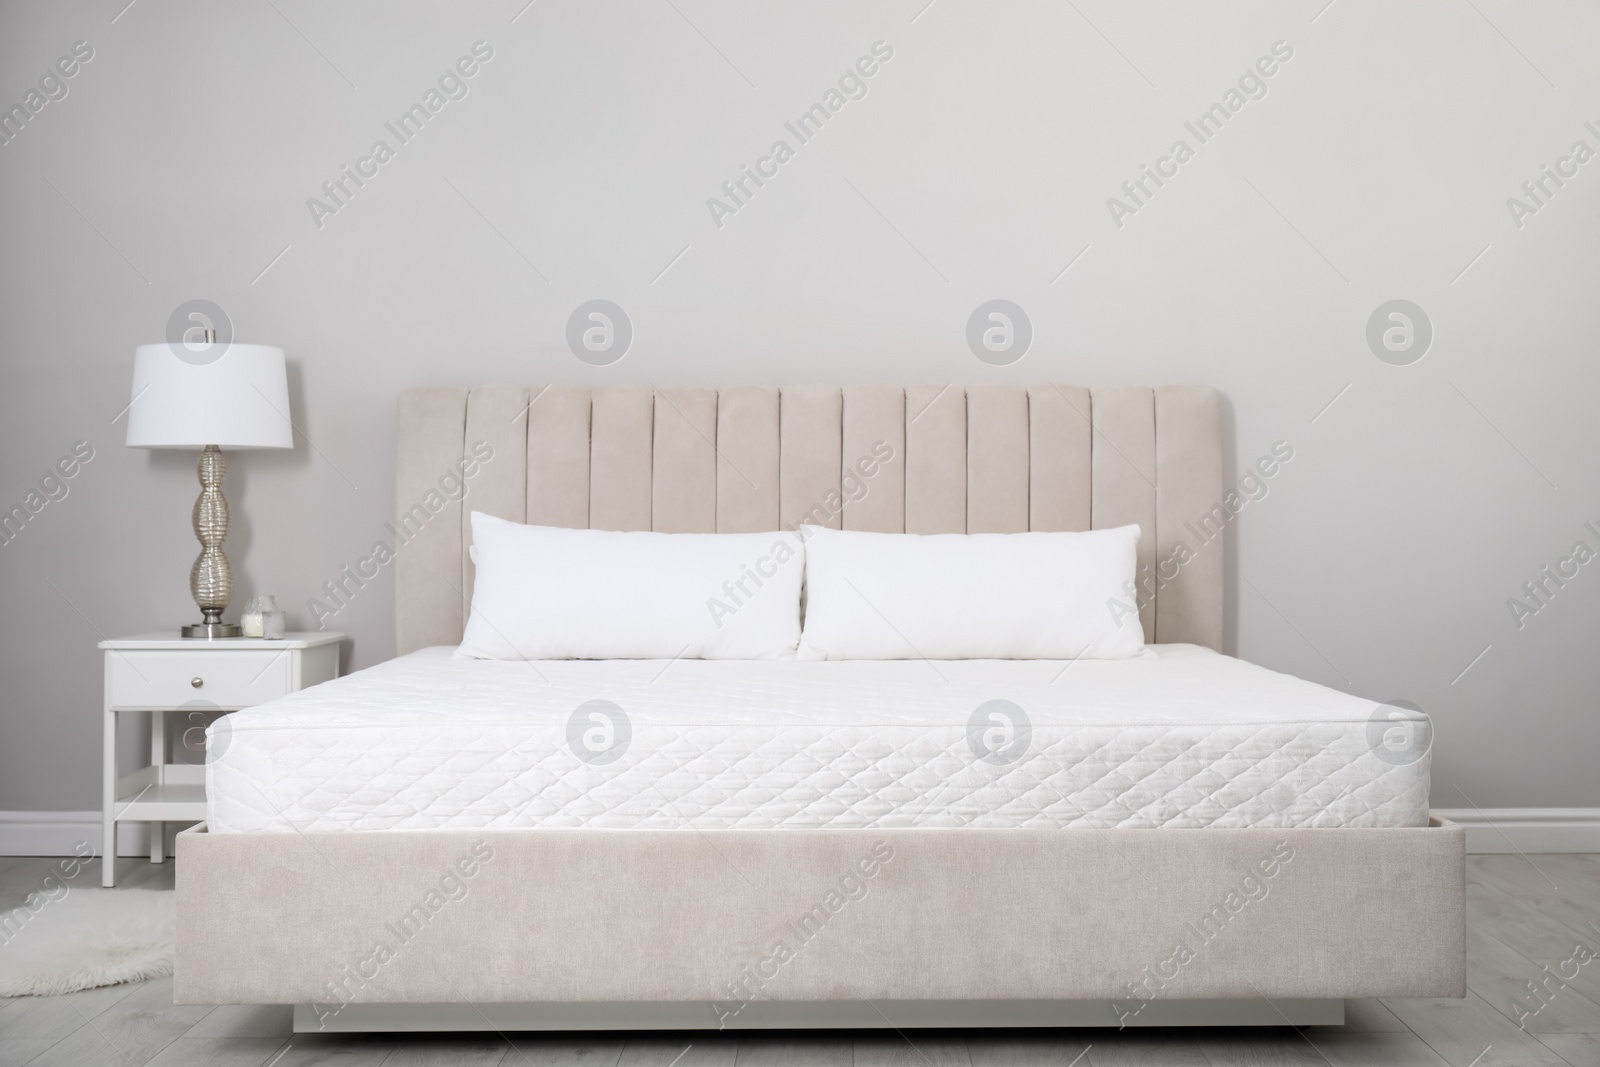 Photo of Comfortable bed with soft white mattress and pillows indoors